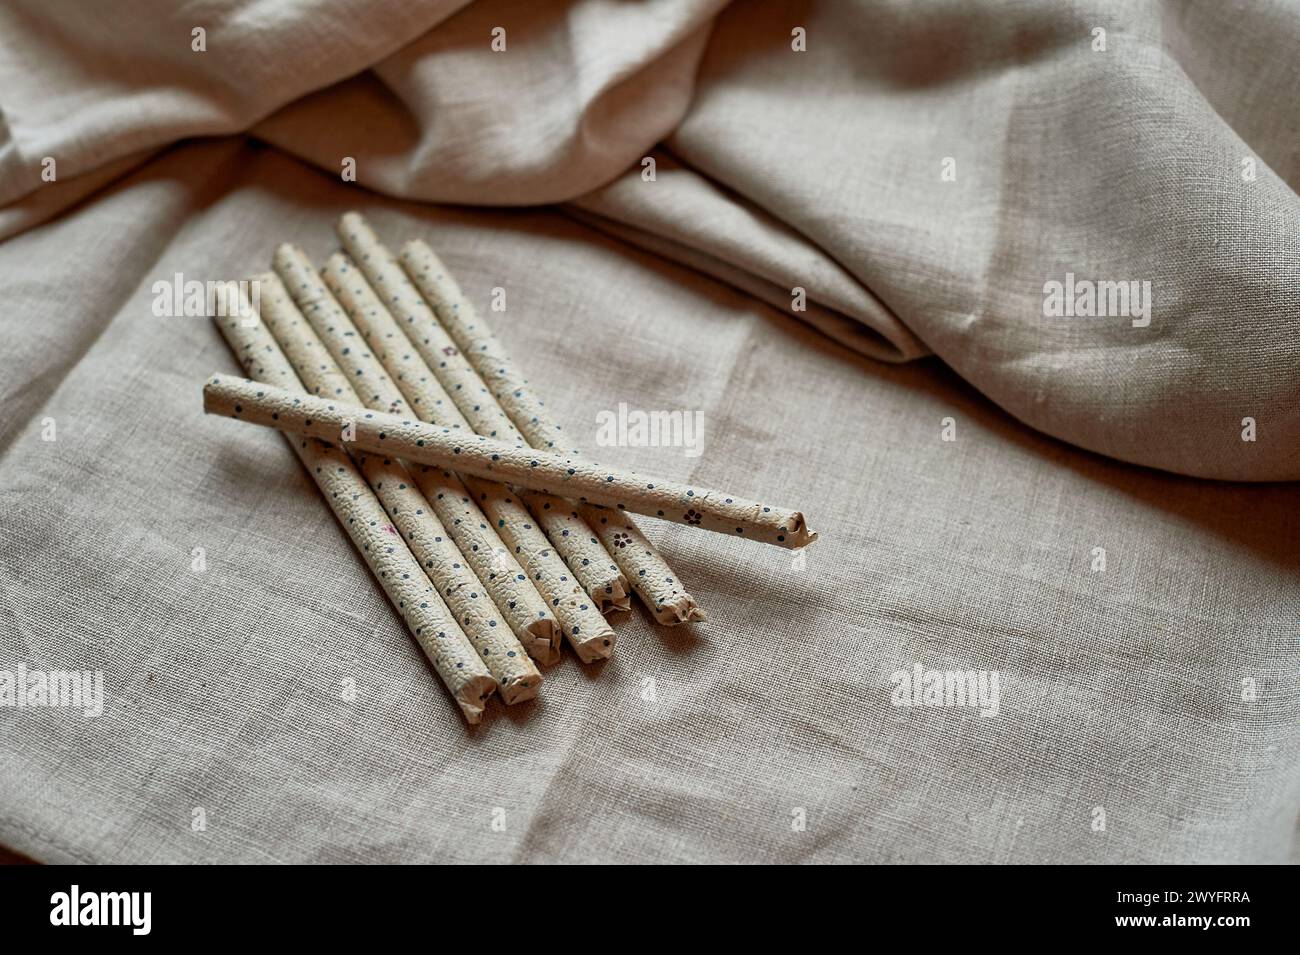 Incense sticks with wormwood for working with energy points. Chinese Alternative Medicine. Stock Photo